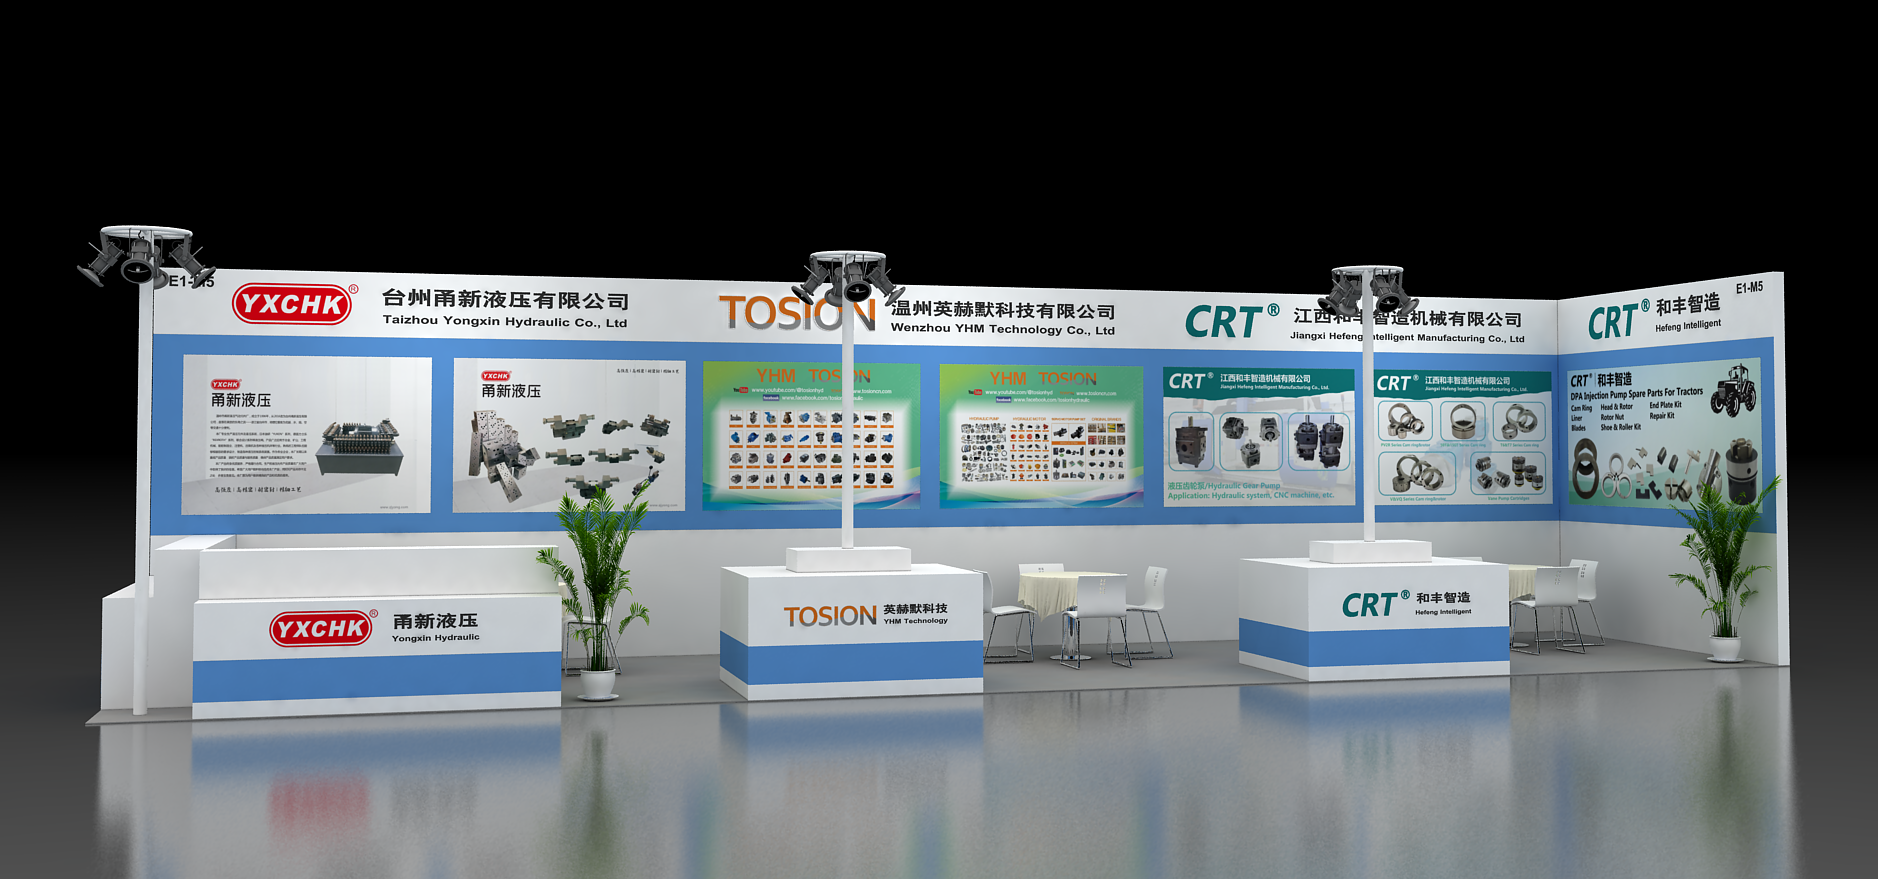 Our company will attend PTC ASIA exhibition on October 24-27, 2023. The location of our booth is E1-M5, Shanghai New International Expo Center